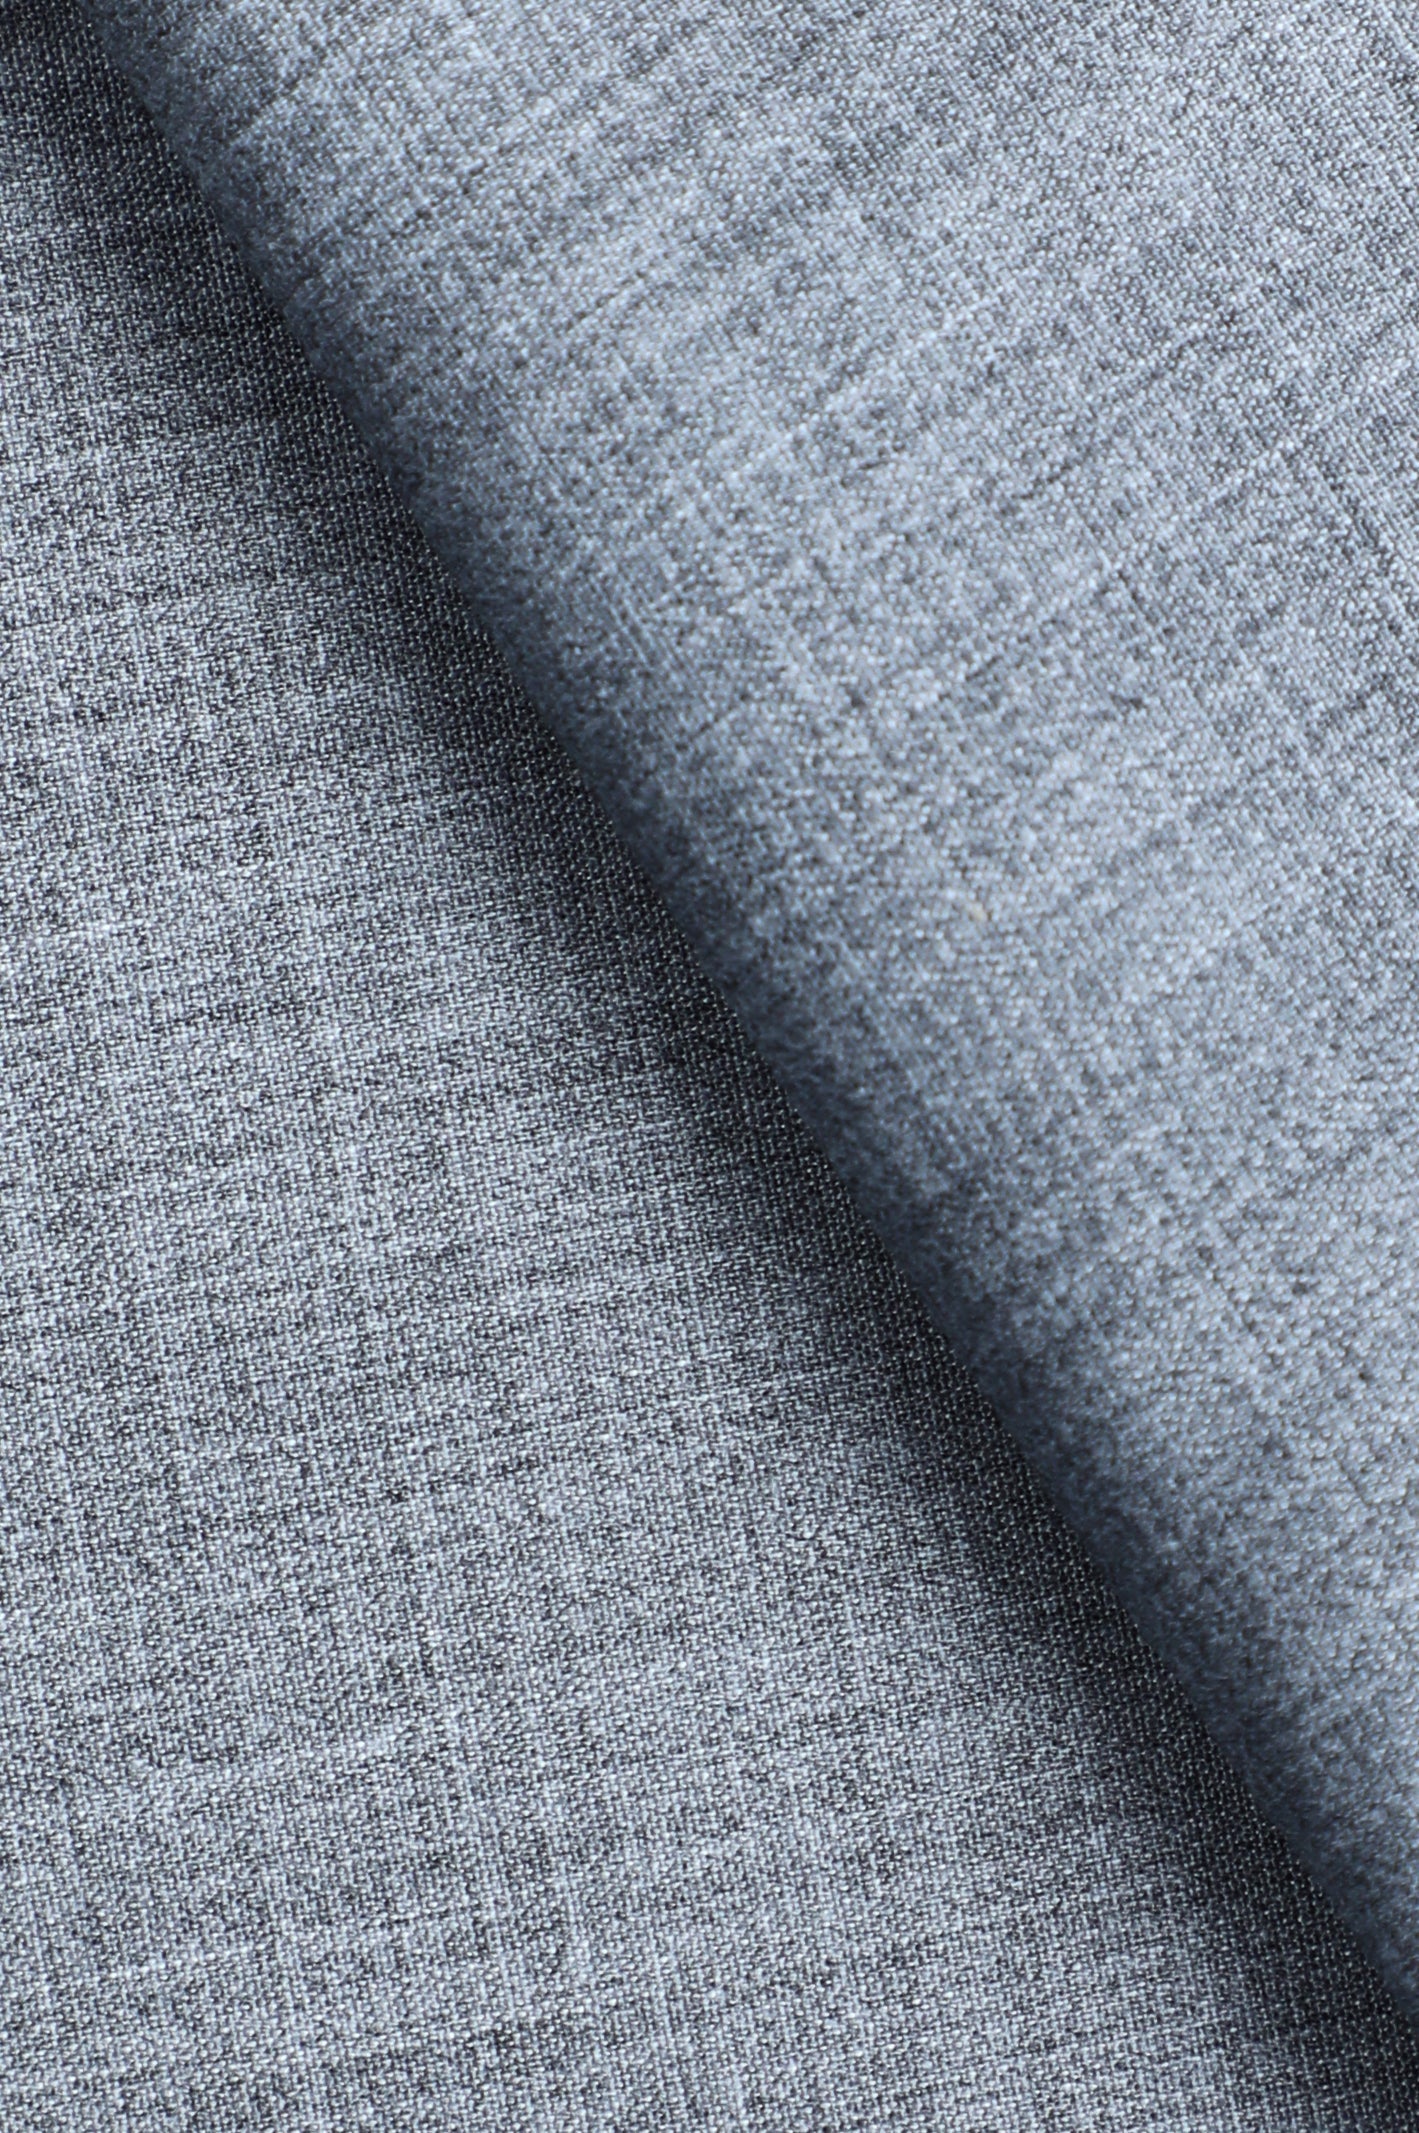 Unstitched Fabric for Men SKU: US0193-H-GREY - Diners